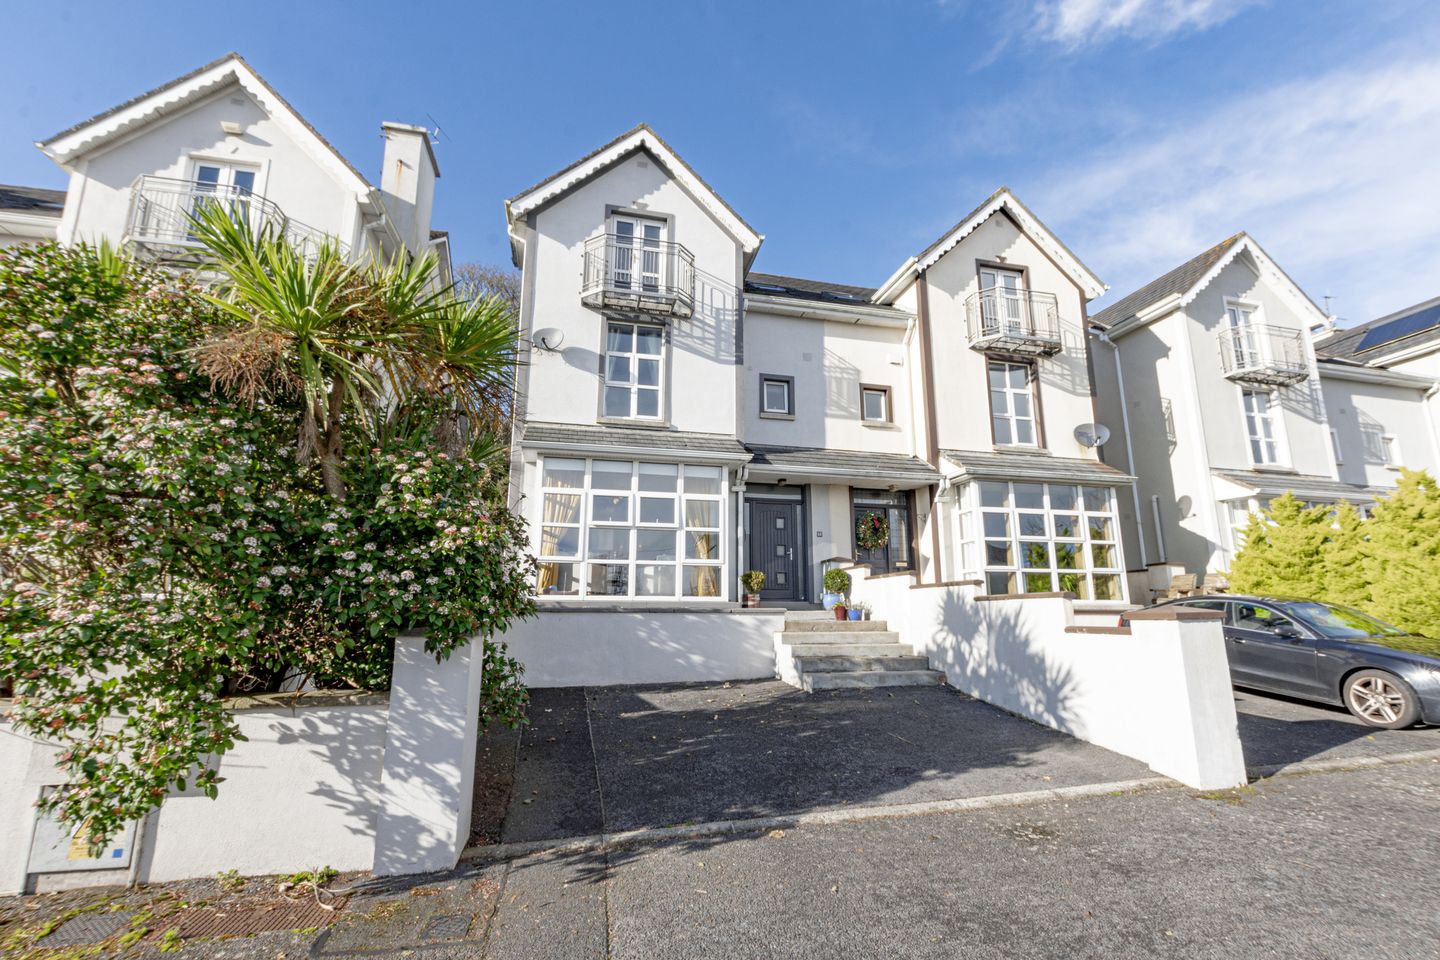 5 The Orchard, Waterford Road, Tramore, Co. Waterford, X91F2R3